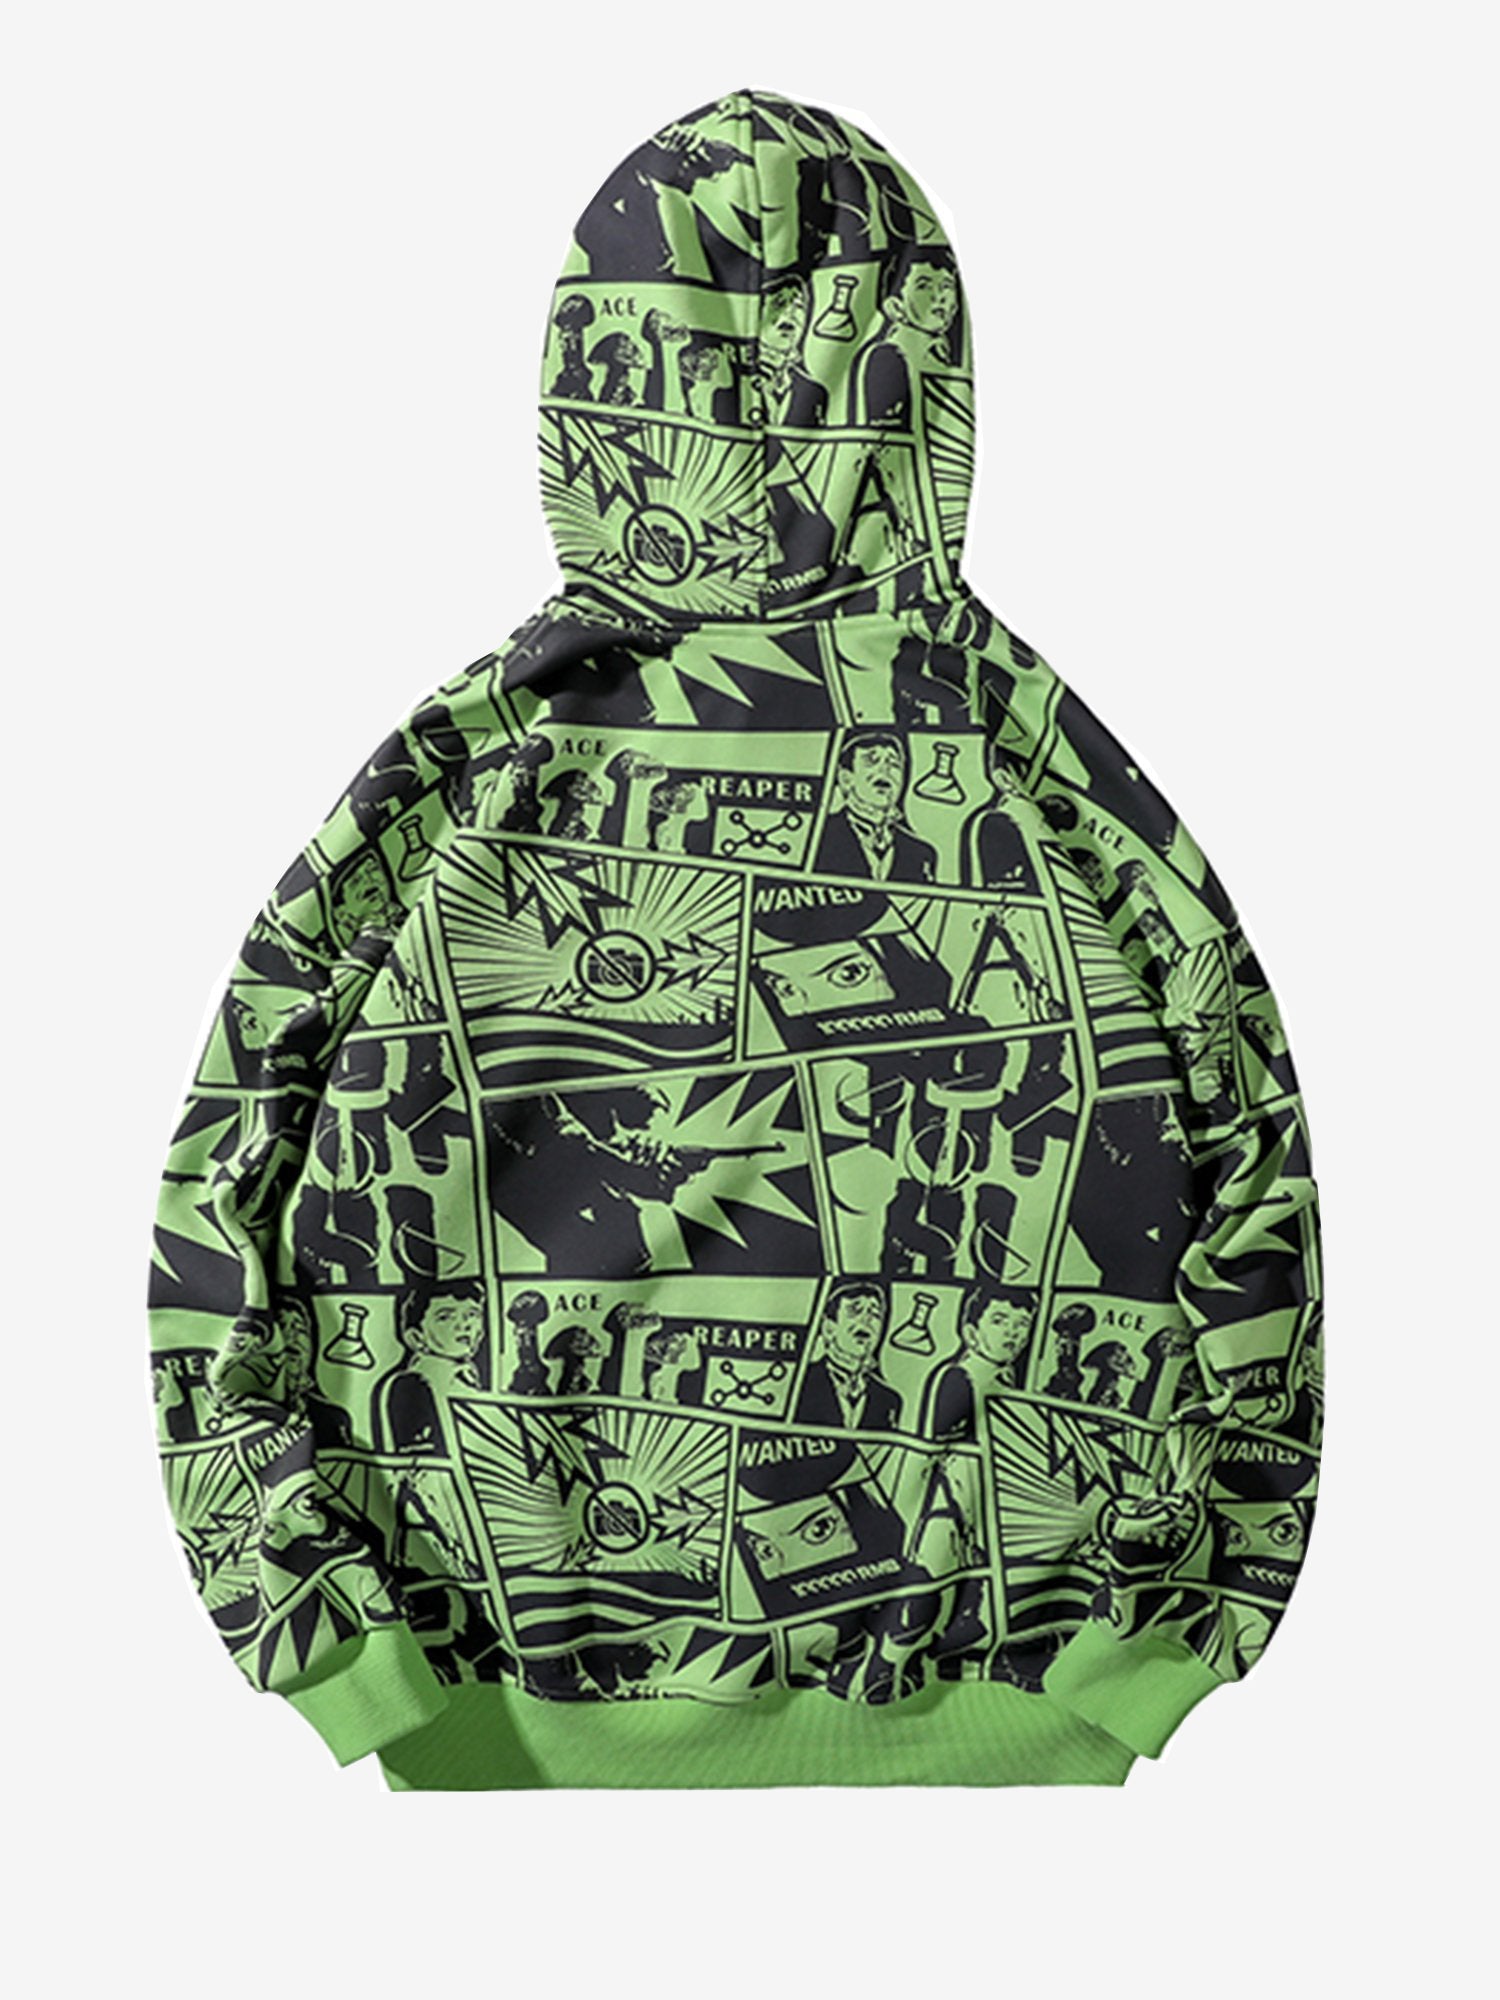 JUSTNOTAG Cartoon Polyester Cotton Hooded Hoodies